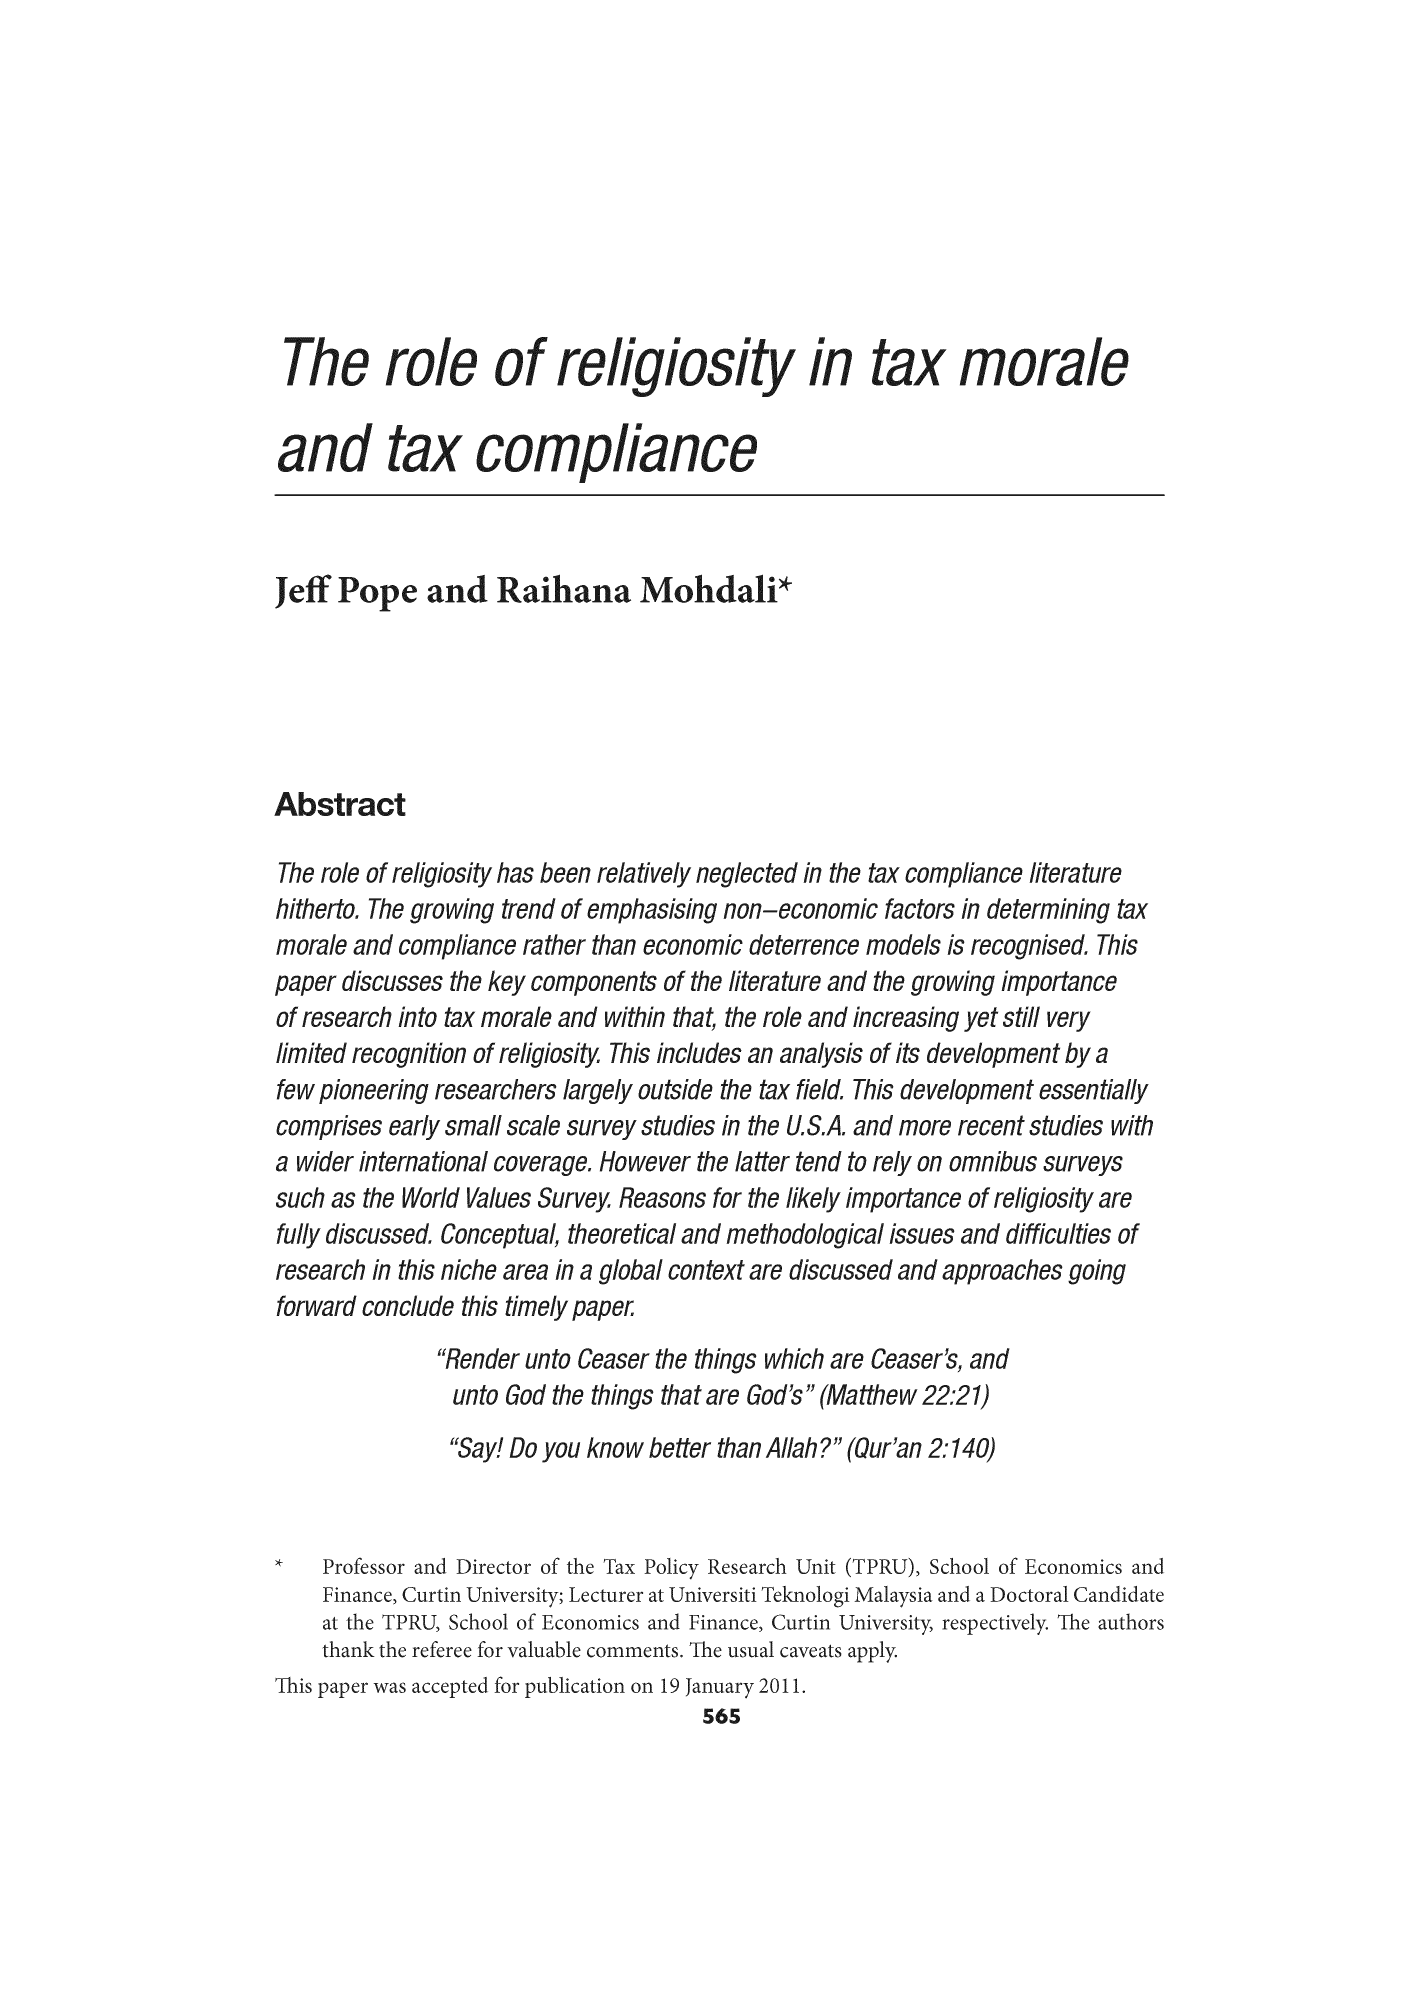 handle is hein.journals/austraxrum25 and id is 565 raw text is: The role of religiosity in tax morale
and tax compliance
Jeff Pope and Raihana Mohdali*
Abstract

esearch into tax morale and within that, the r
ited recognition of religiosity. This includes an,
/ pioneering researchers largely outside the t
riprises early small scale survey studies in the
lider interational coverae. However the latte

e literature
etermining tax
ognised. This
importance

nalysis of its development by a
field. This development essentially
U.S.A. and more recent studies wit/
tend to rely on omnibus surveys

suci asin vvoriubvaluesourv
fully discussed. Conceptual, t/
research in this niche area in .
forward conclude this timely T

eti
)ba

sonsiorie lim;
cal and methodoh
l context are disc

7to God the things that an
ay! Do you know better t

itherfo. The

figiosity has been r
growing trend of e
qmoliance rather th

fiscusses t/

elatively neglected in the tax comph
mphasising non-economic factors i
an economic deterrence models is
lents of the literature and the arowi

issues

isse

fgiosity ati
fifficulties <
ches qoint&

f'S (Mait

(Qur'an 2:140)


